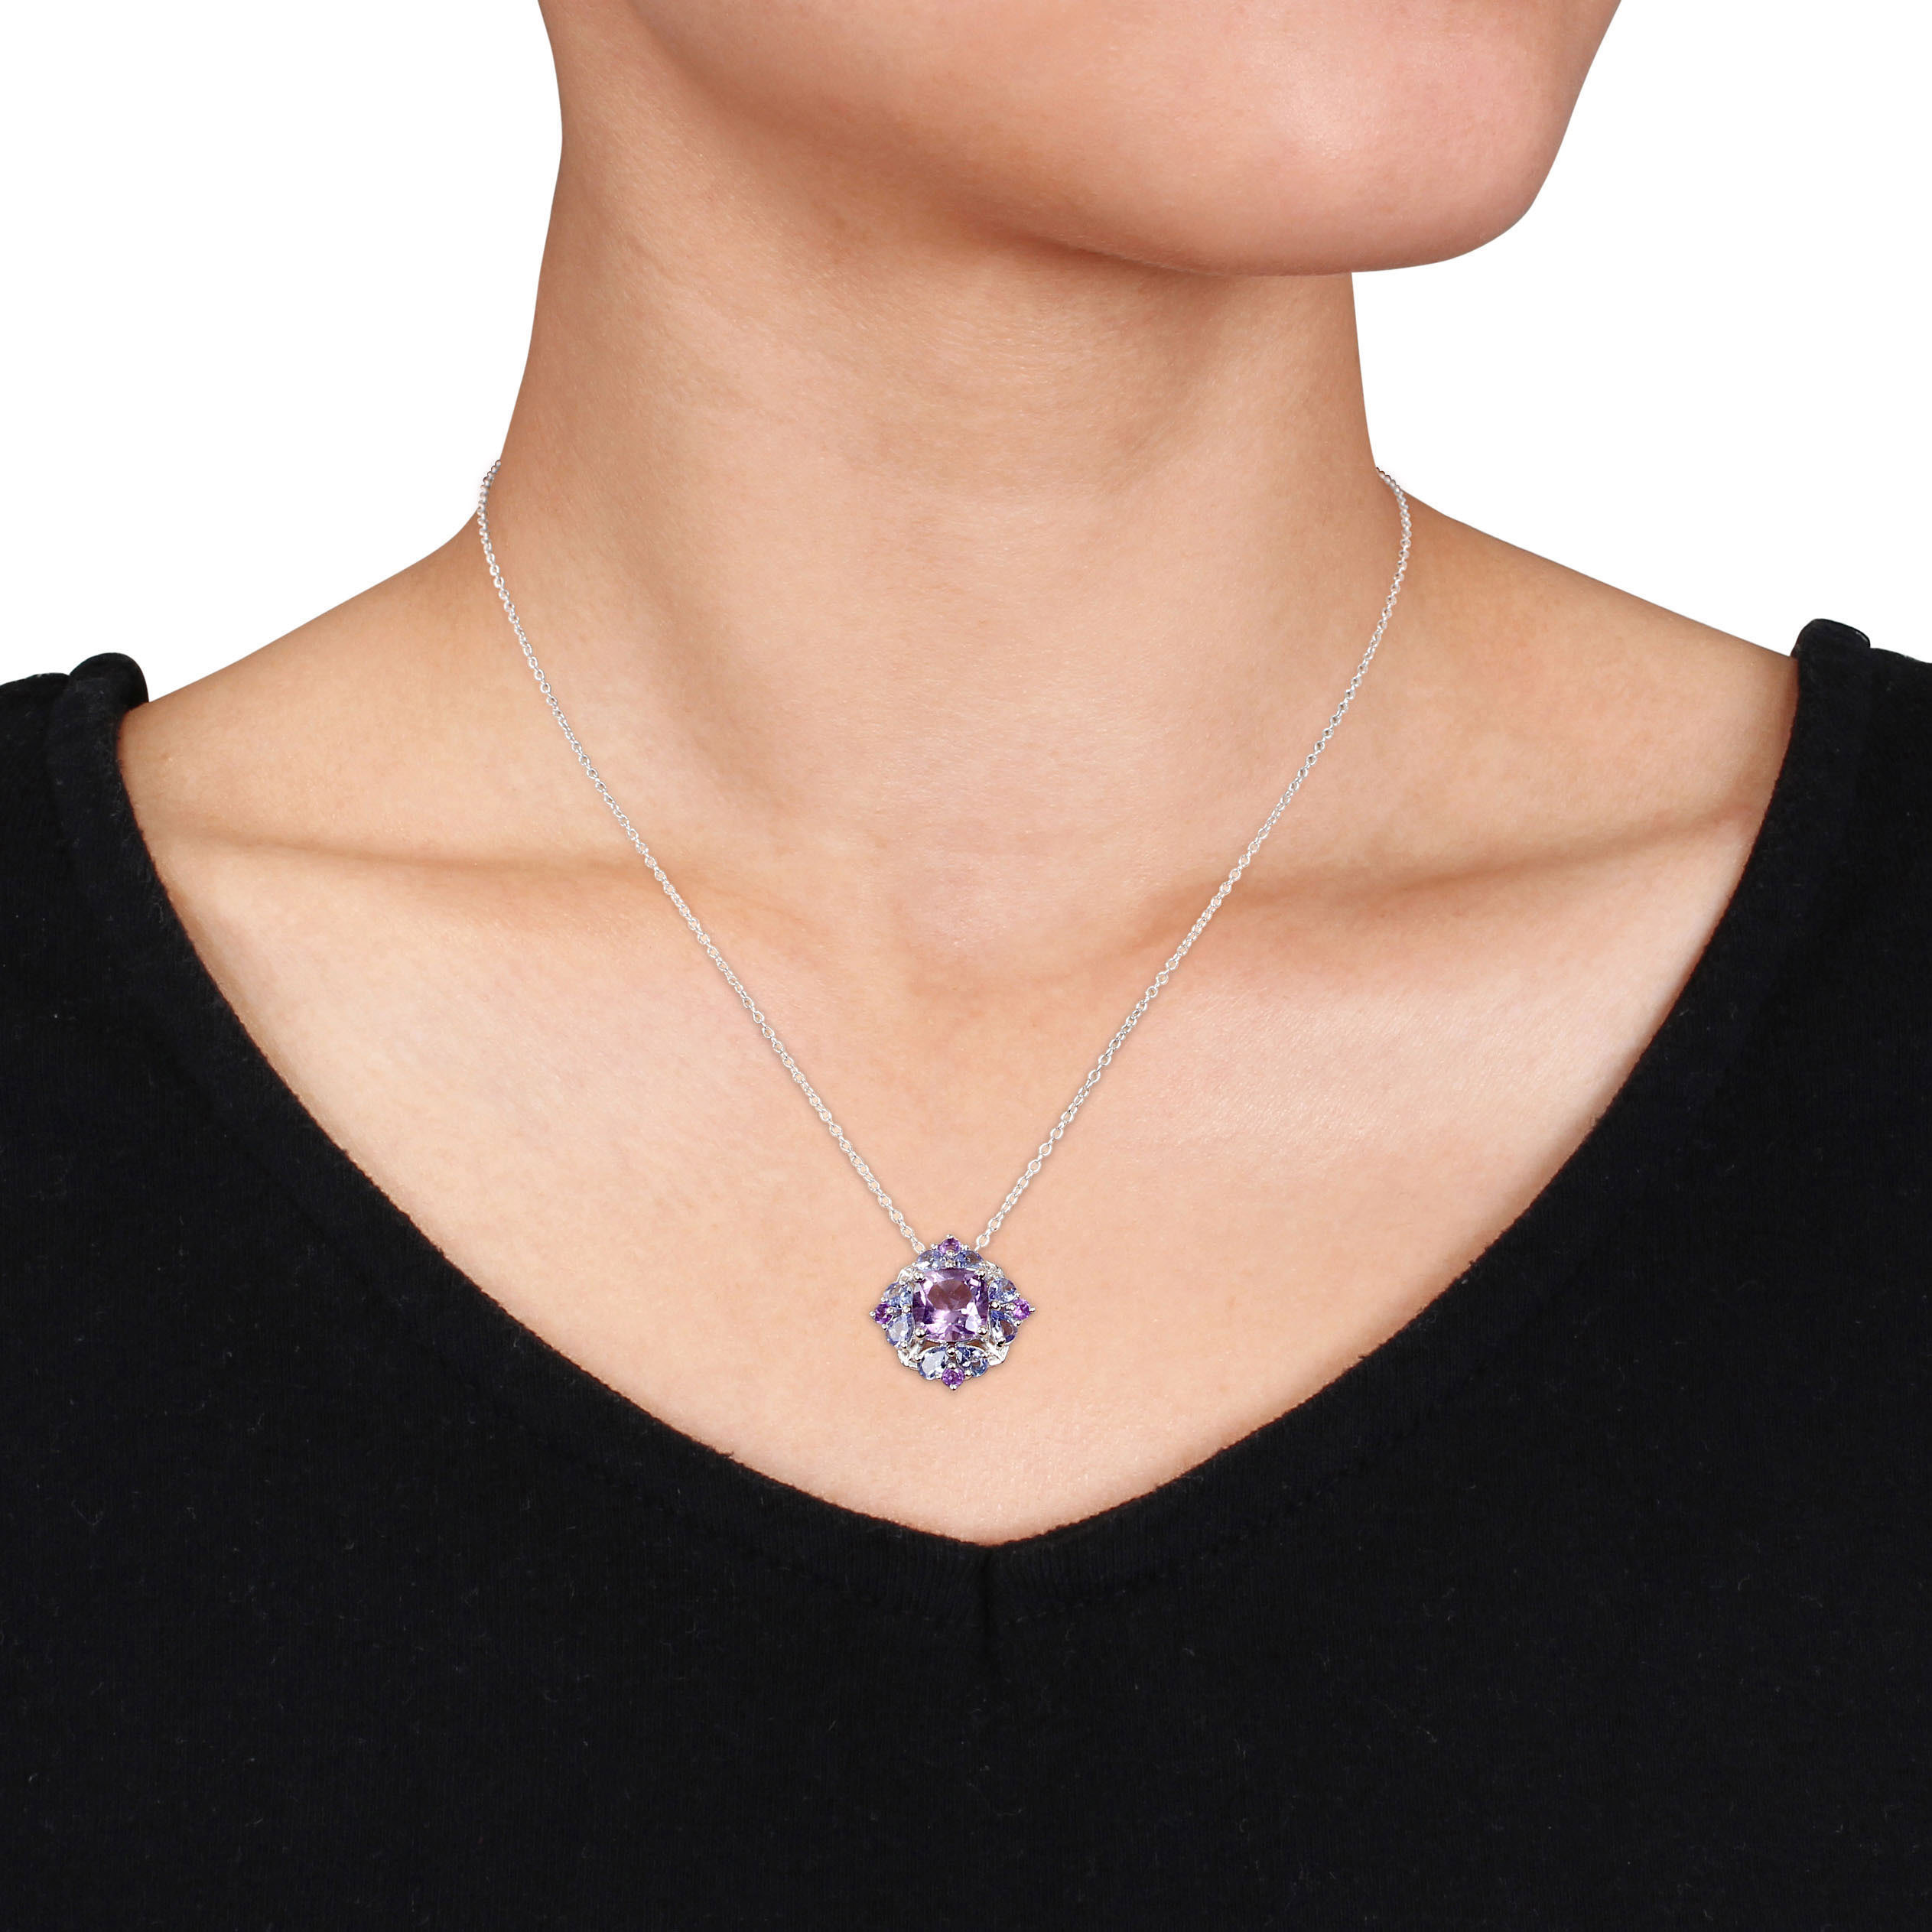 3 CT TGW Amethyst and Tanzanite Quatrefoil Floral Pendant with Chain in Sterling Silver